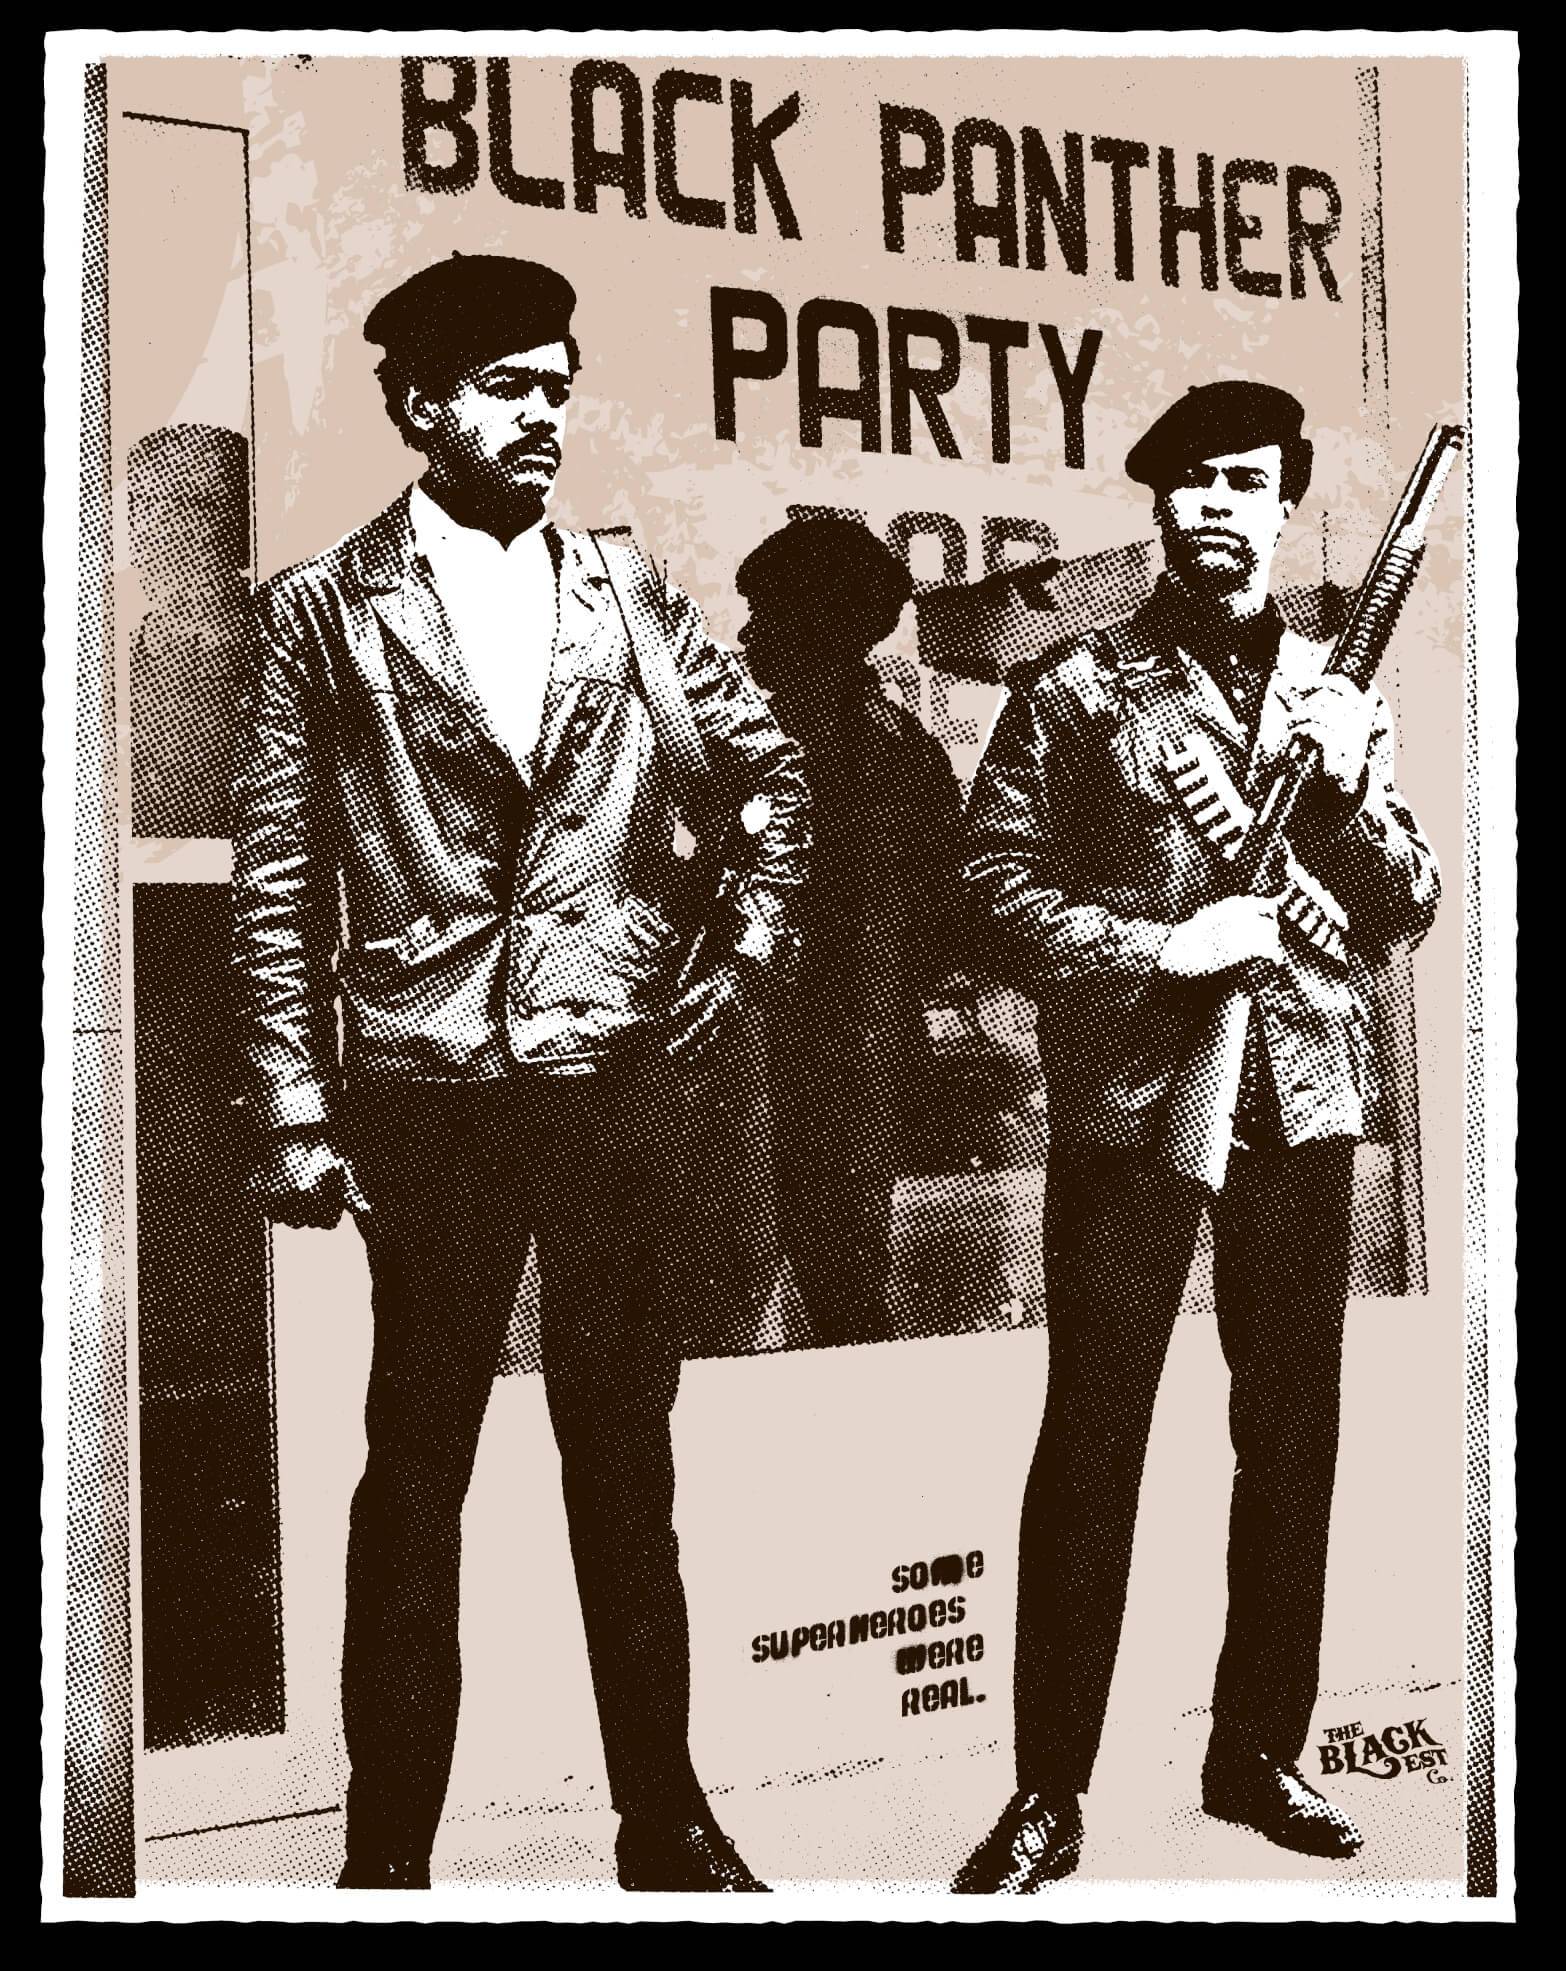 a black and white photo of two black panther party members standing together